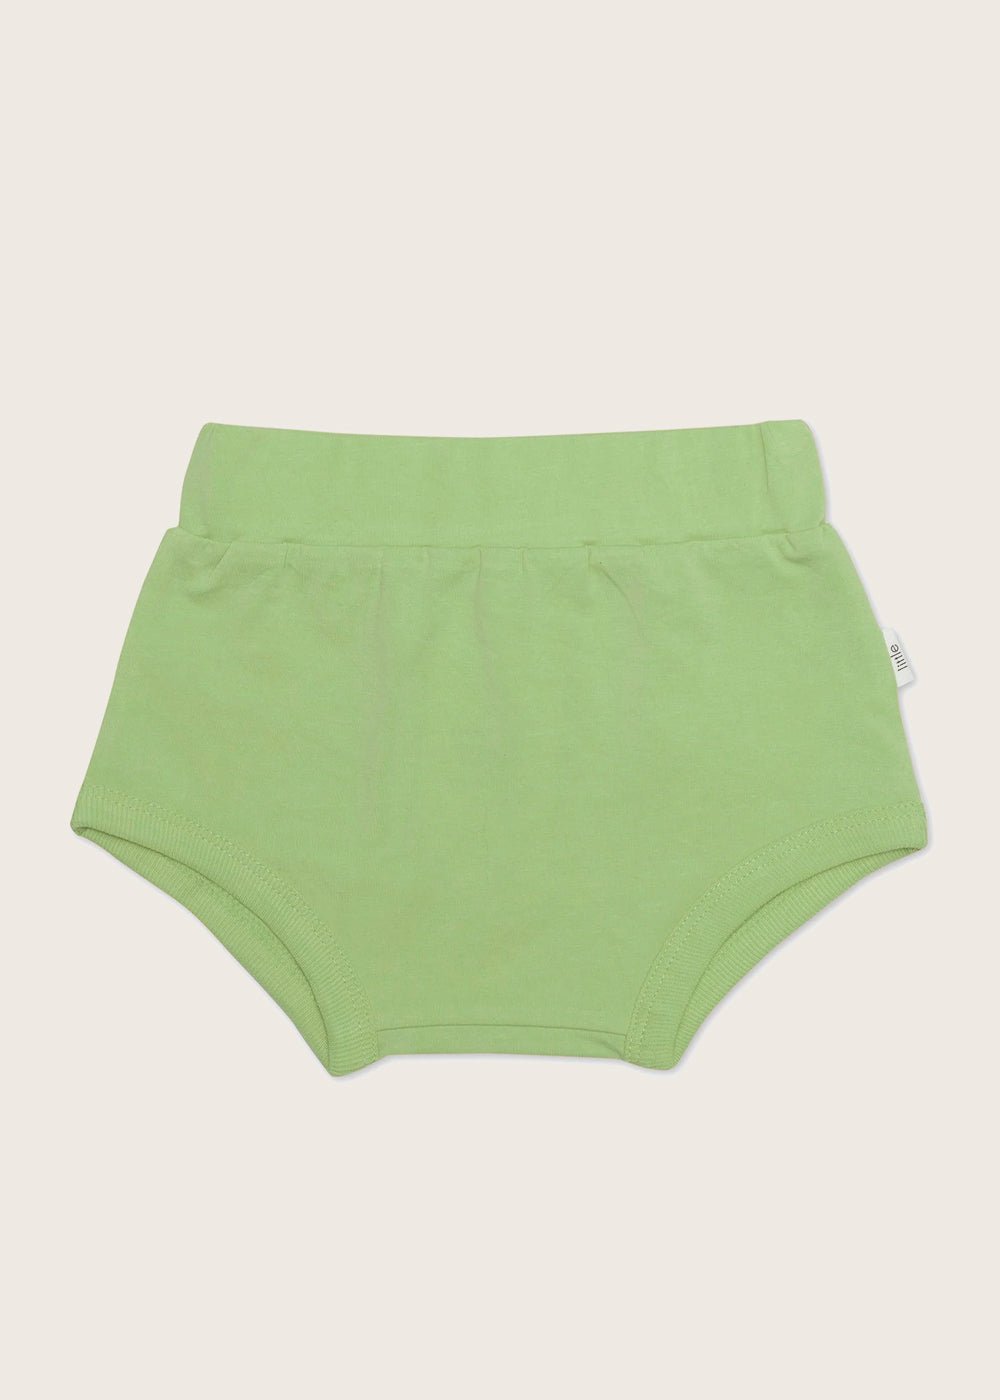 Little Elinor by NICO Sage Baby Bloomers - New Classics Studios Sustainable Ethical Fashion Canada